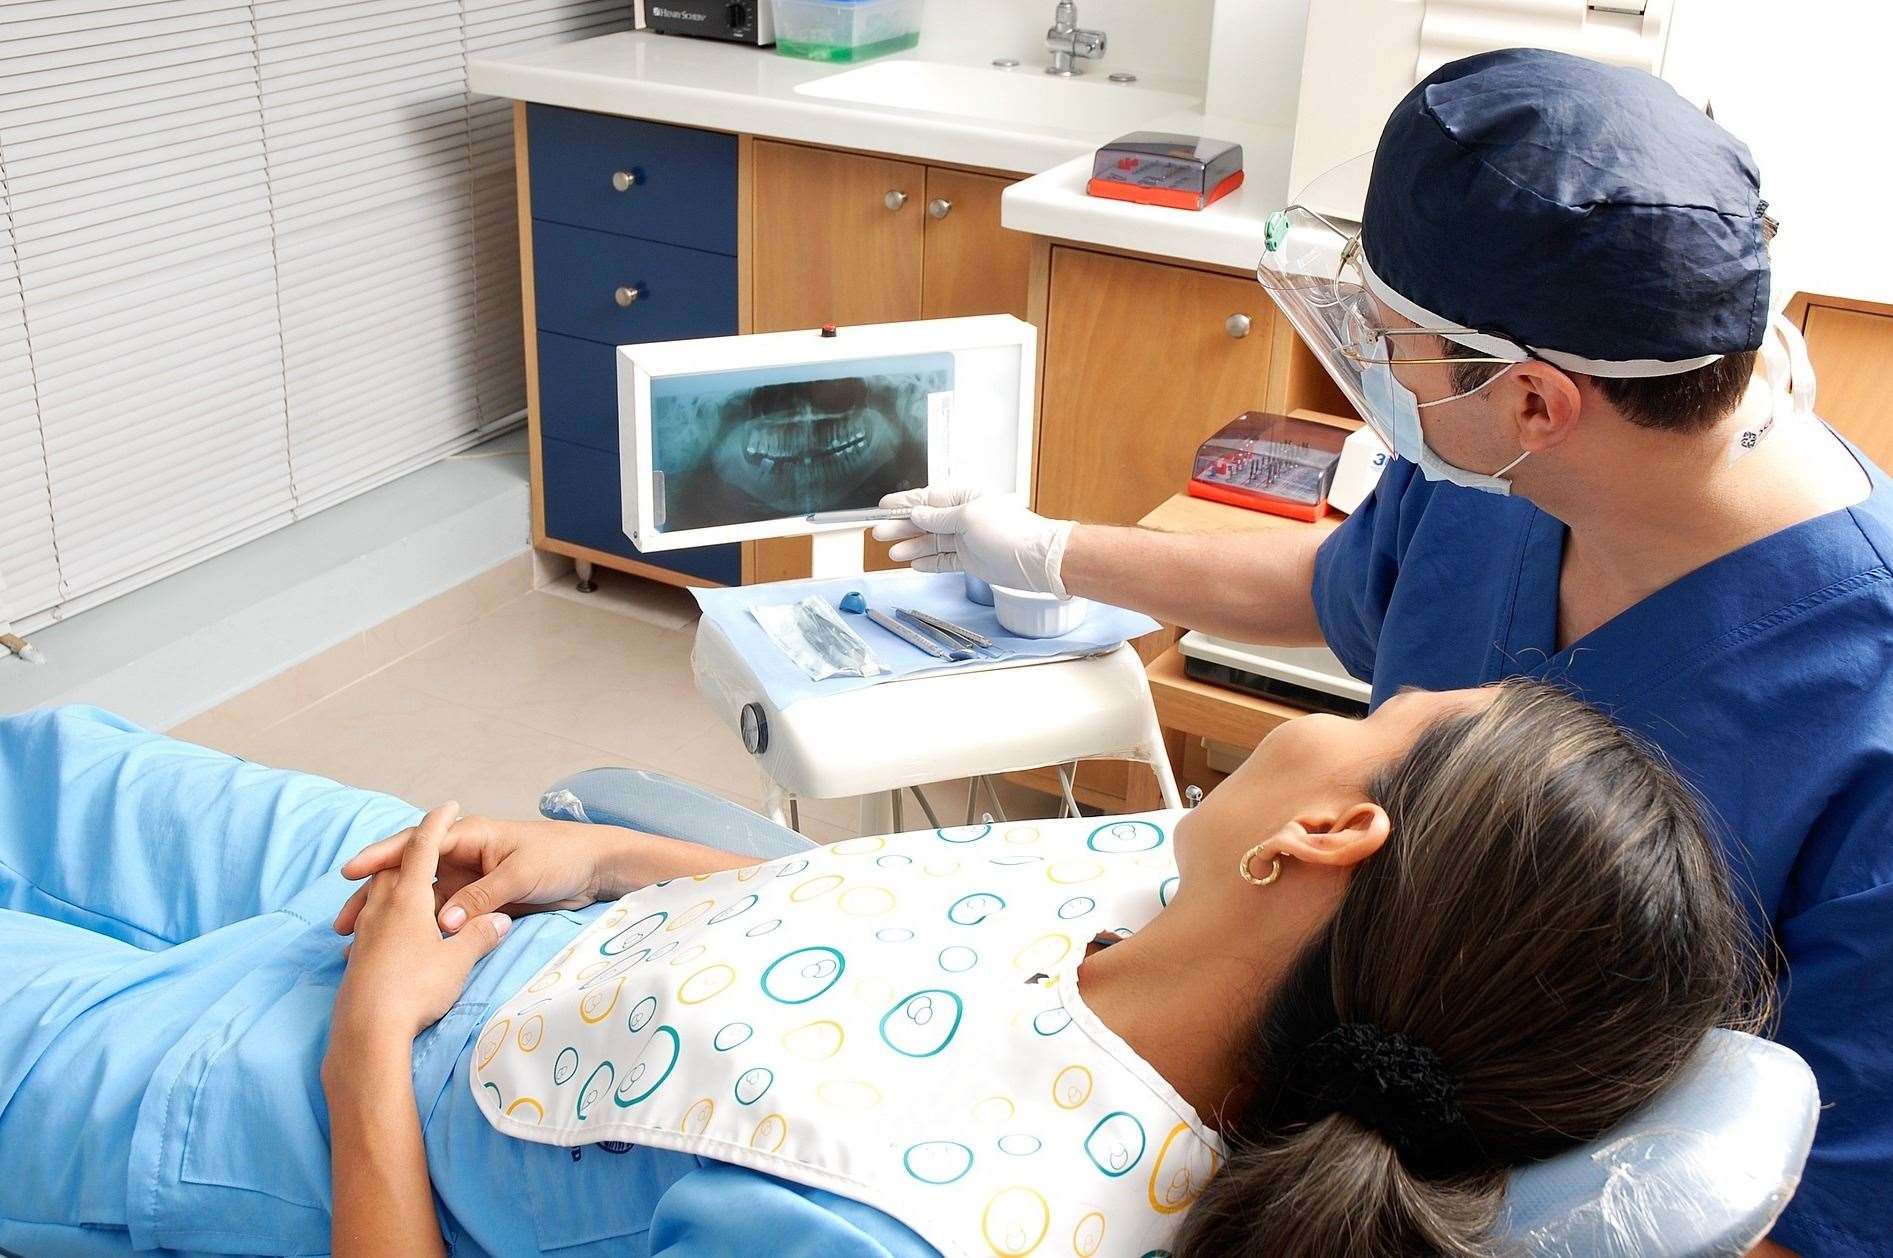 There are fears over the number of dentists taking on NHS patients